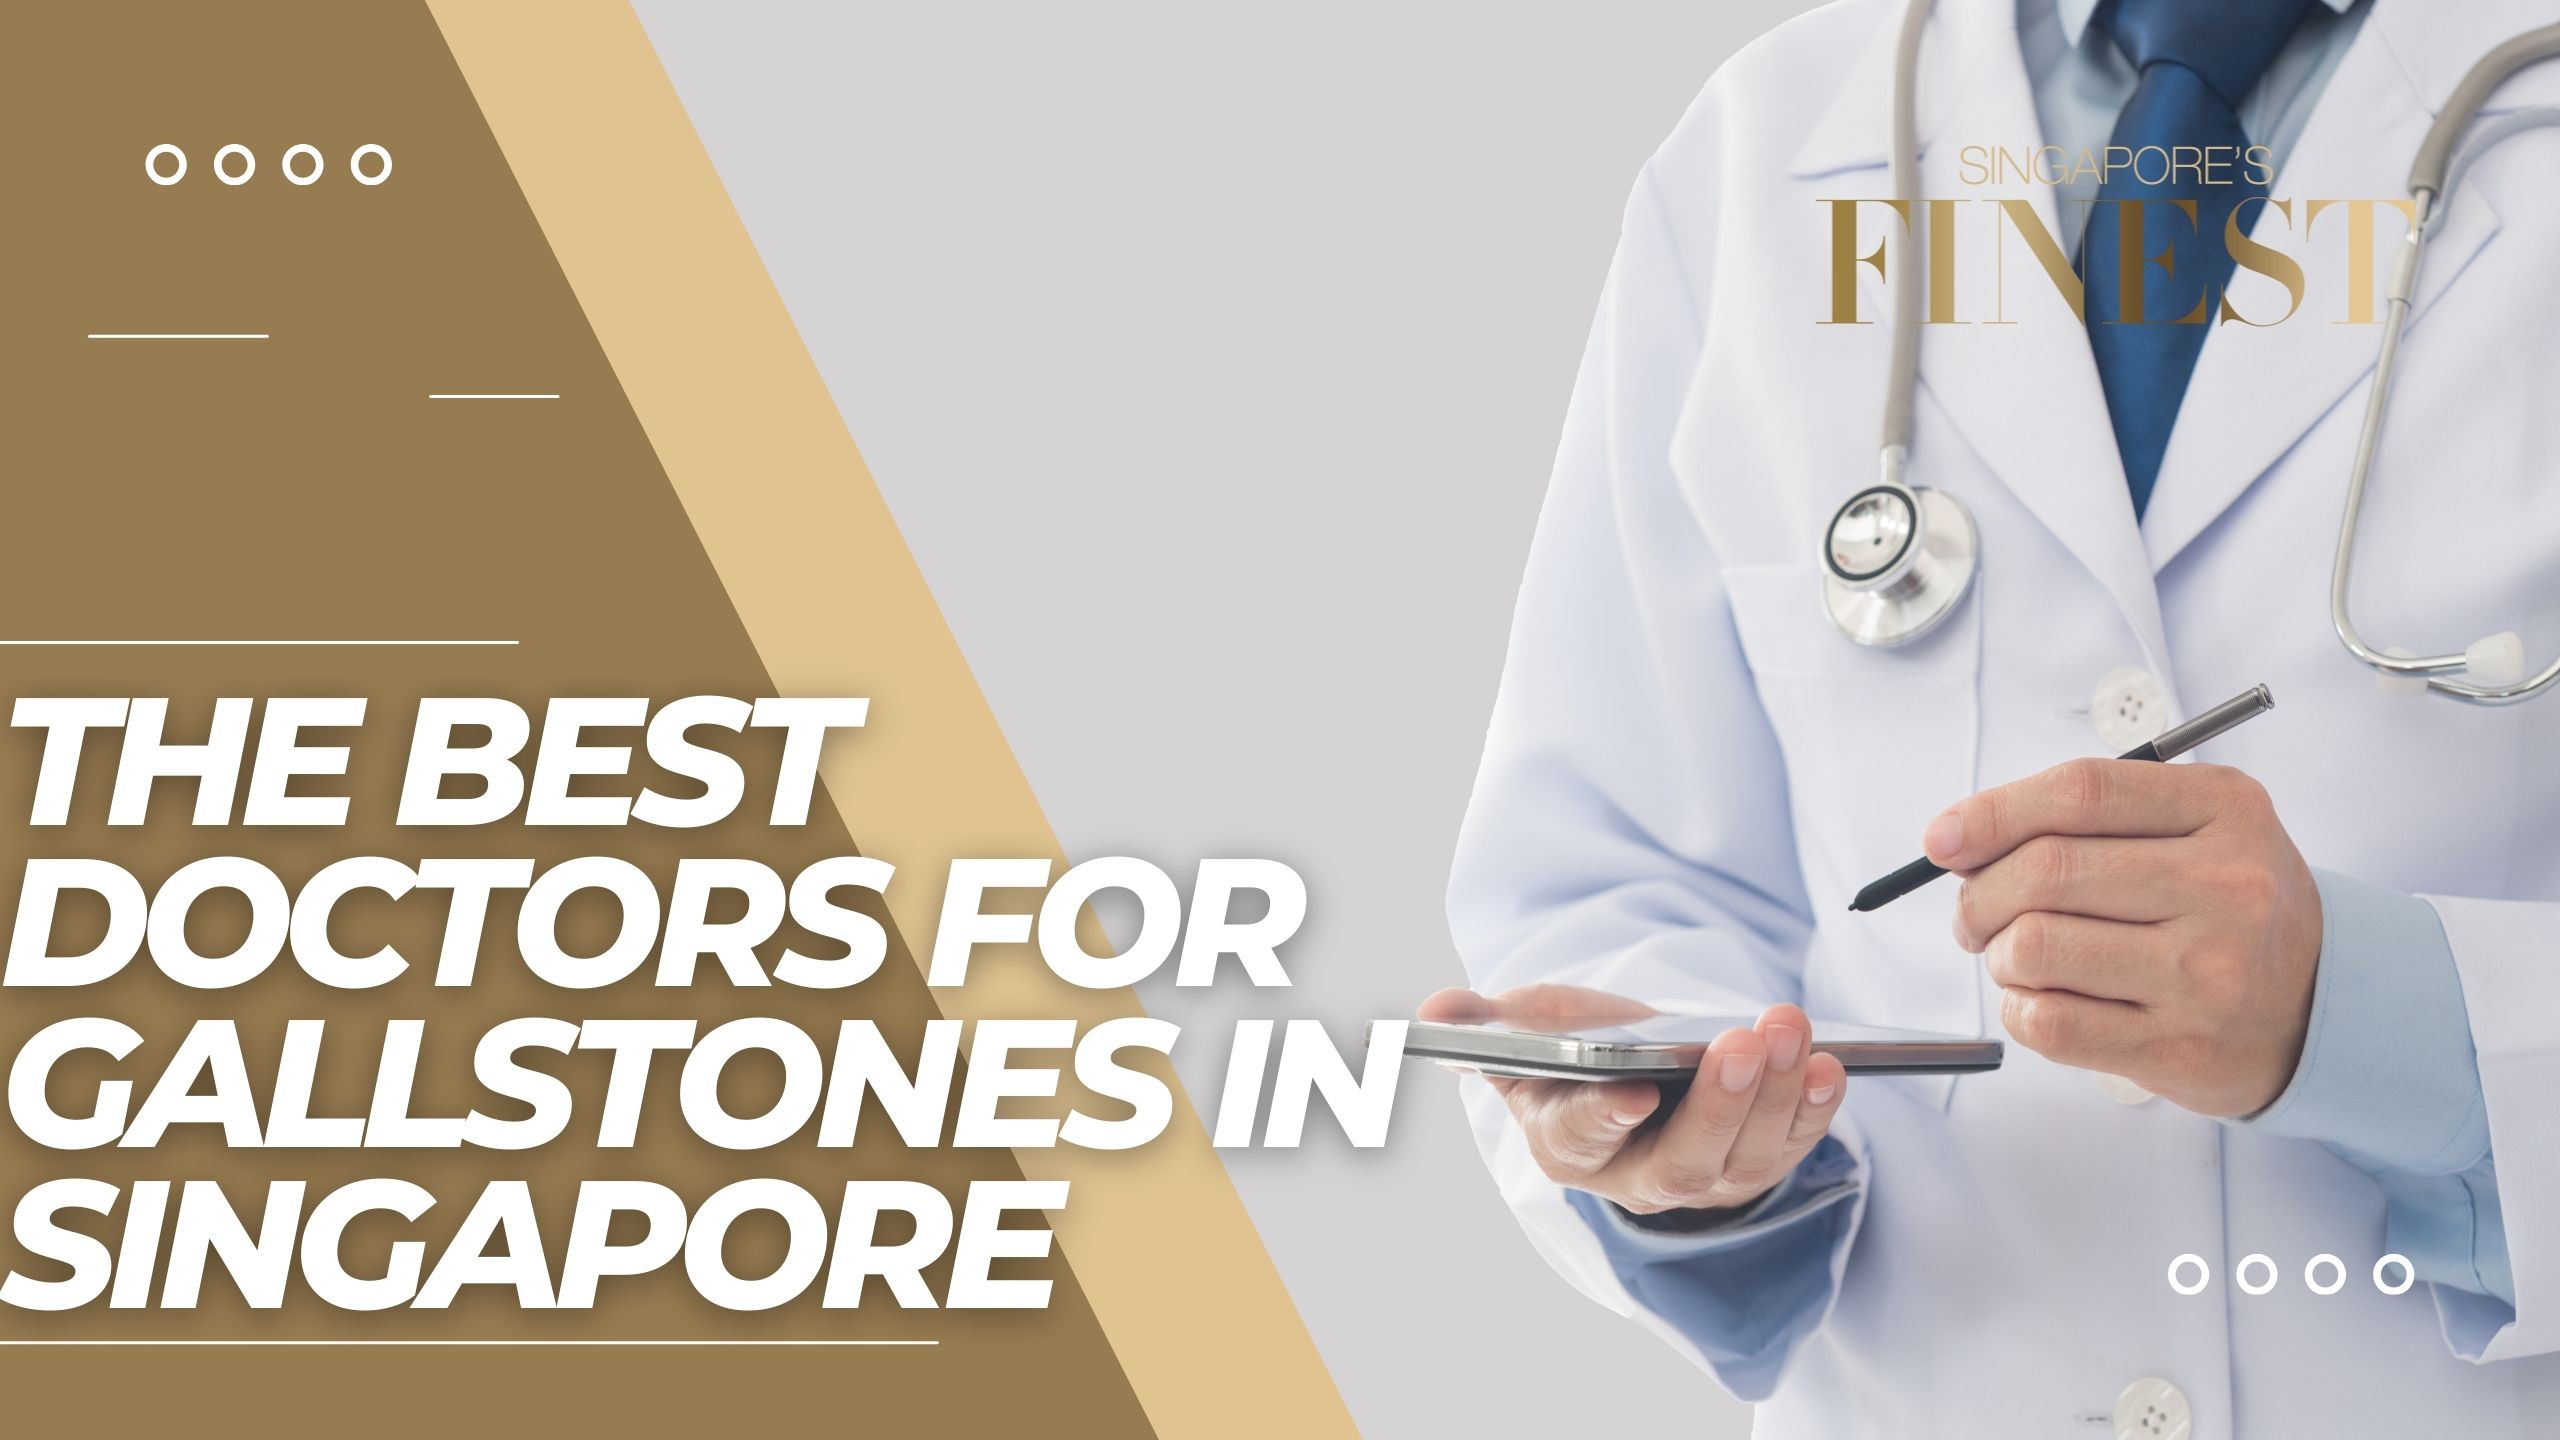 The Finest Doctors for Gallstones in Singapore